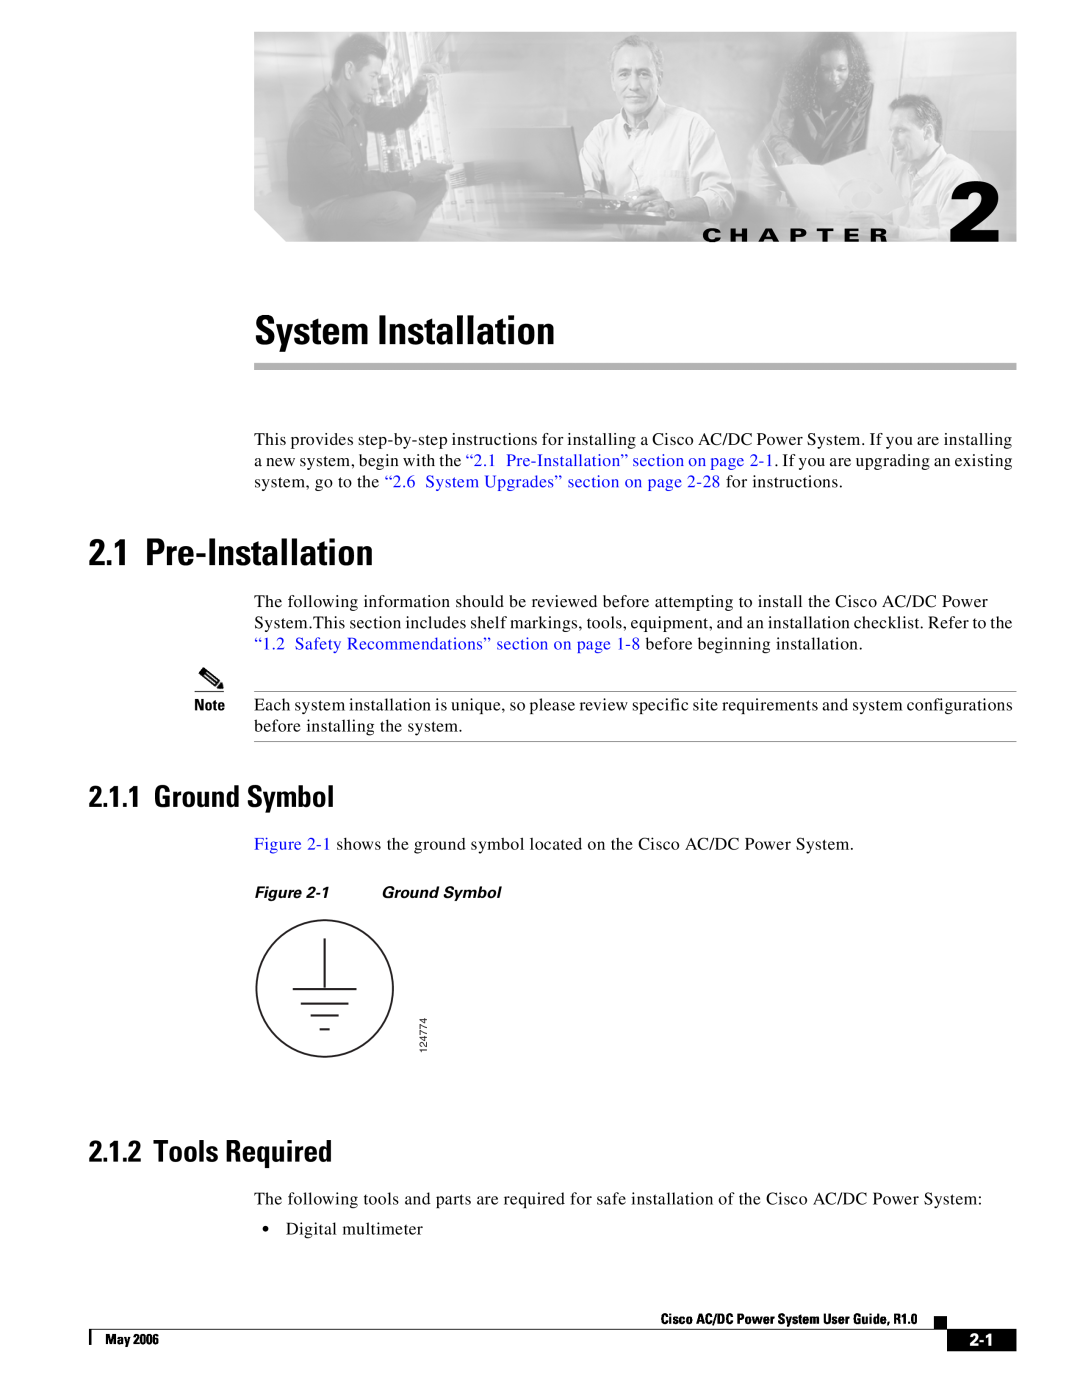 Cisco Systems 159330, 124792, 124778 System Installation, Pre-Installation, Ground Symbol, Tools Required, C H A P T E R 